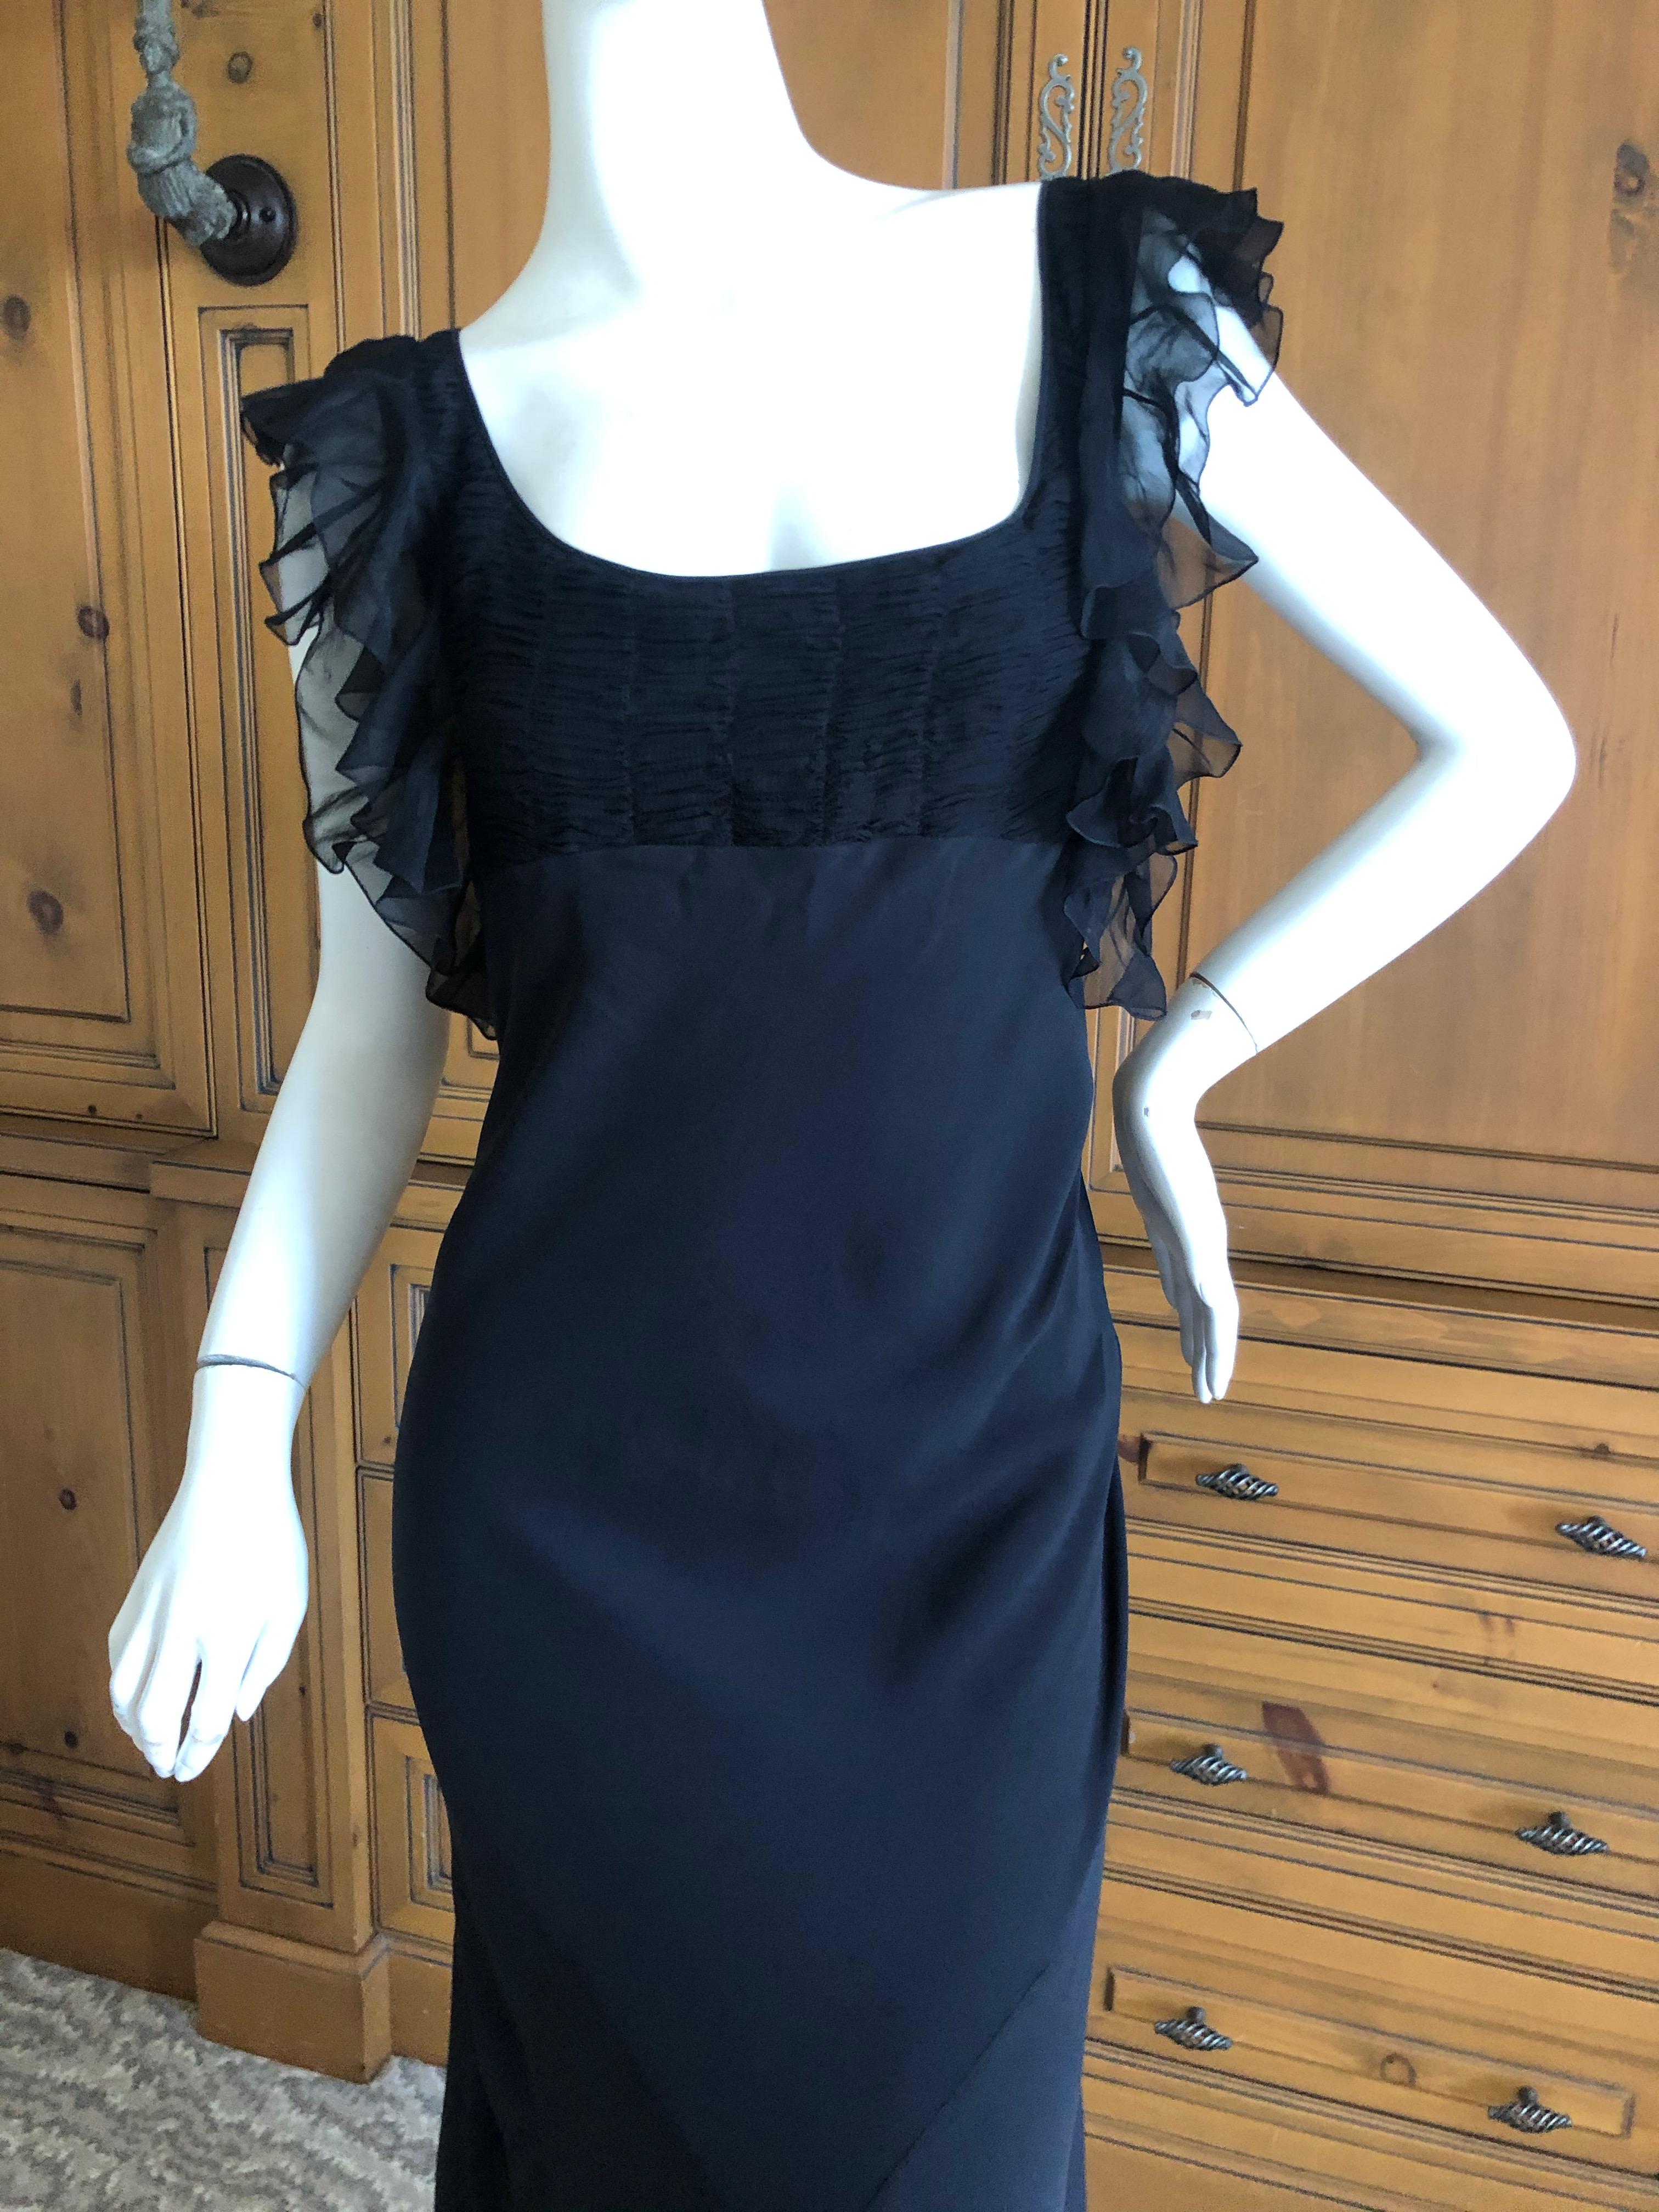 John Galliano Vintage Black Bias Cut Empire Style Evening Dress with Ruffles In Excellent Condition For Sale In Cloverdale, CA